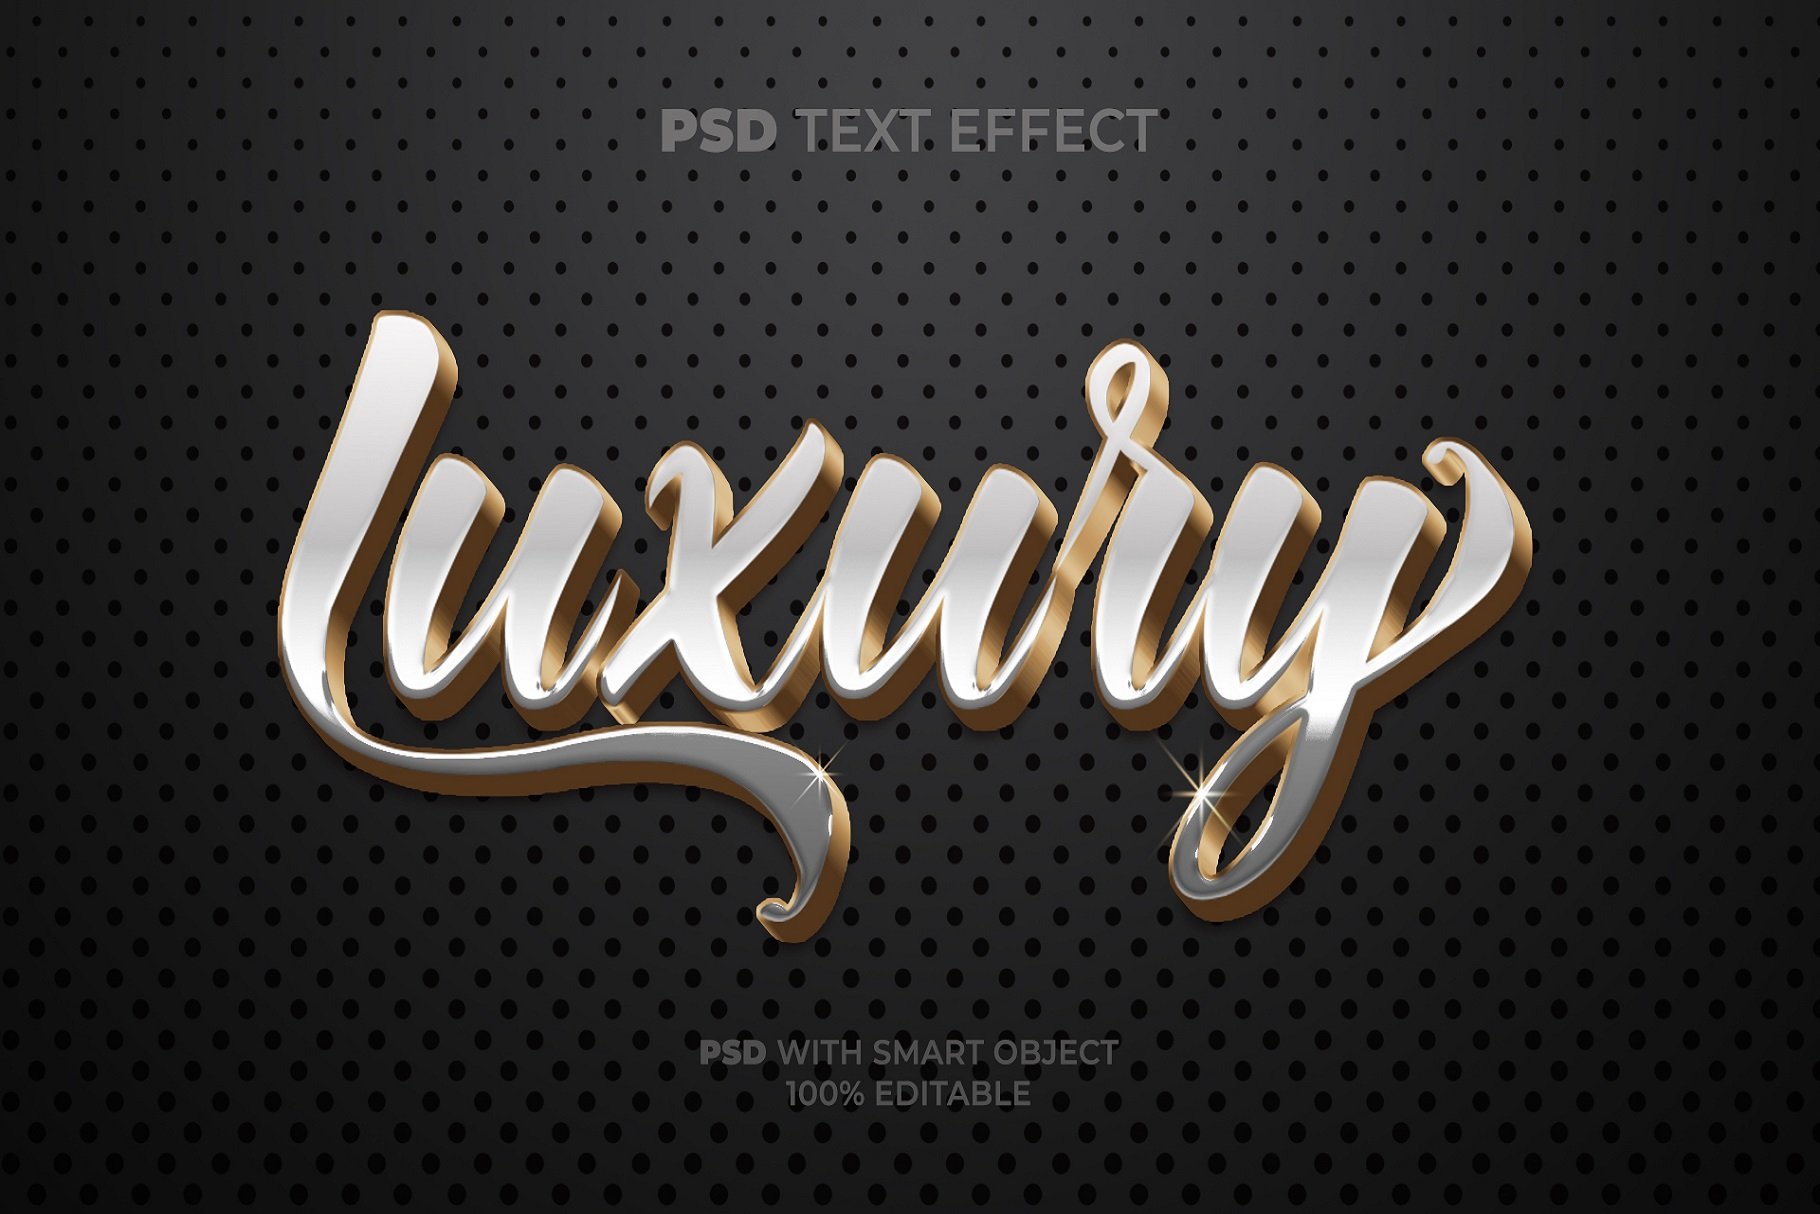 Gold text effect luxury stylecover image.